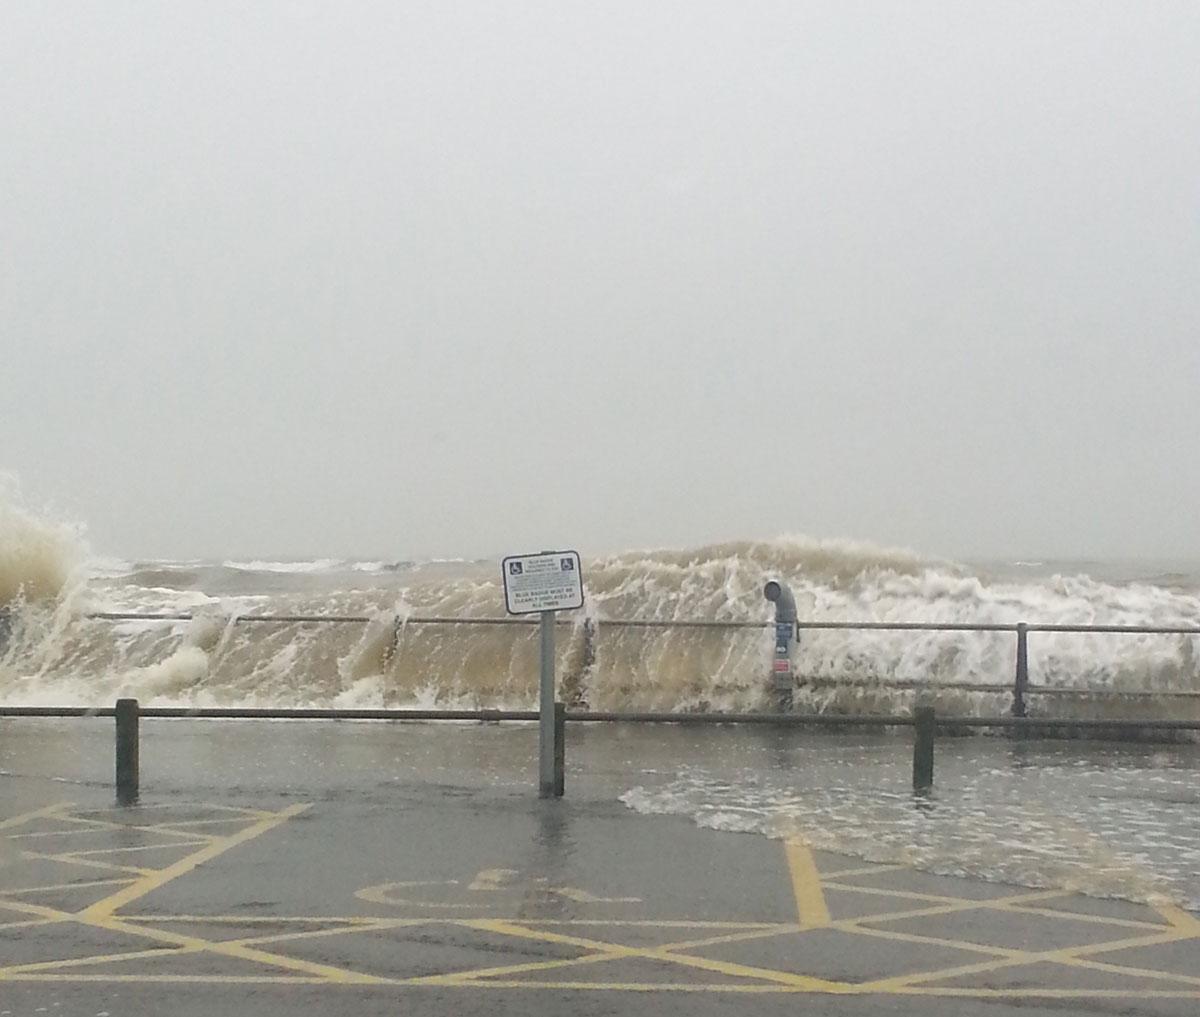 High tide at Mudeford Quay. Picture sent in by reader.